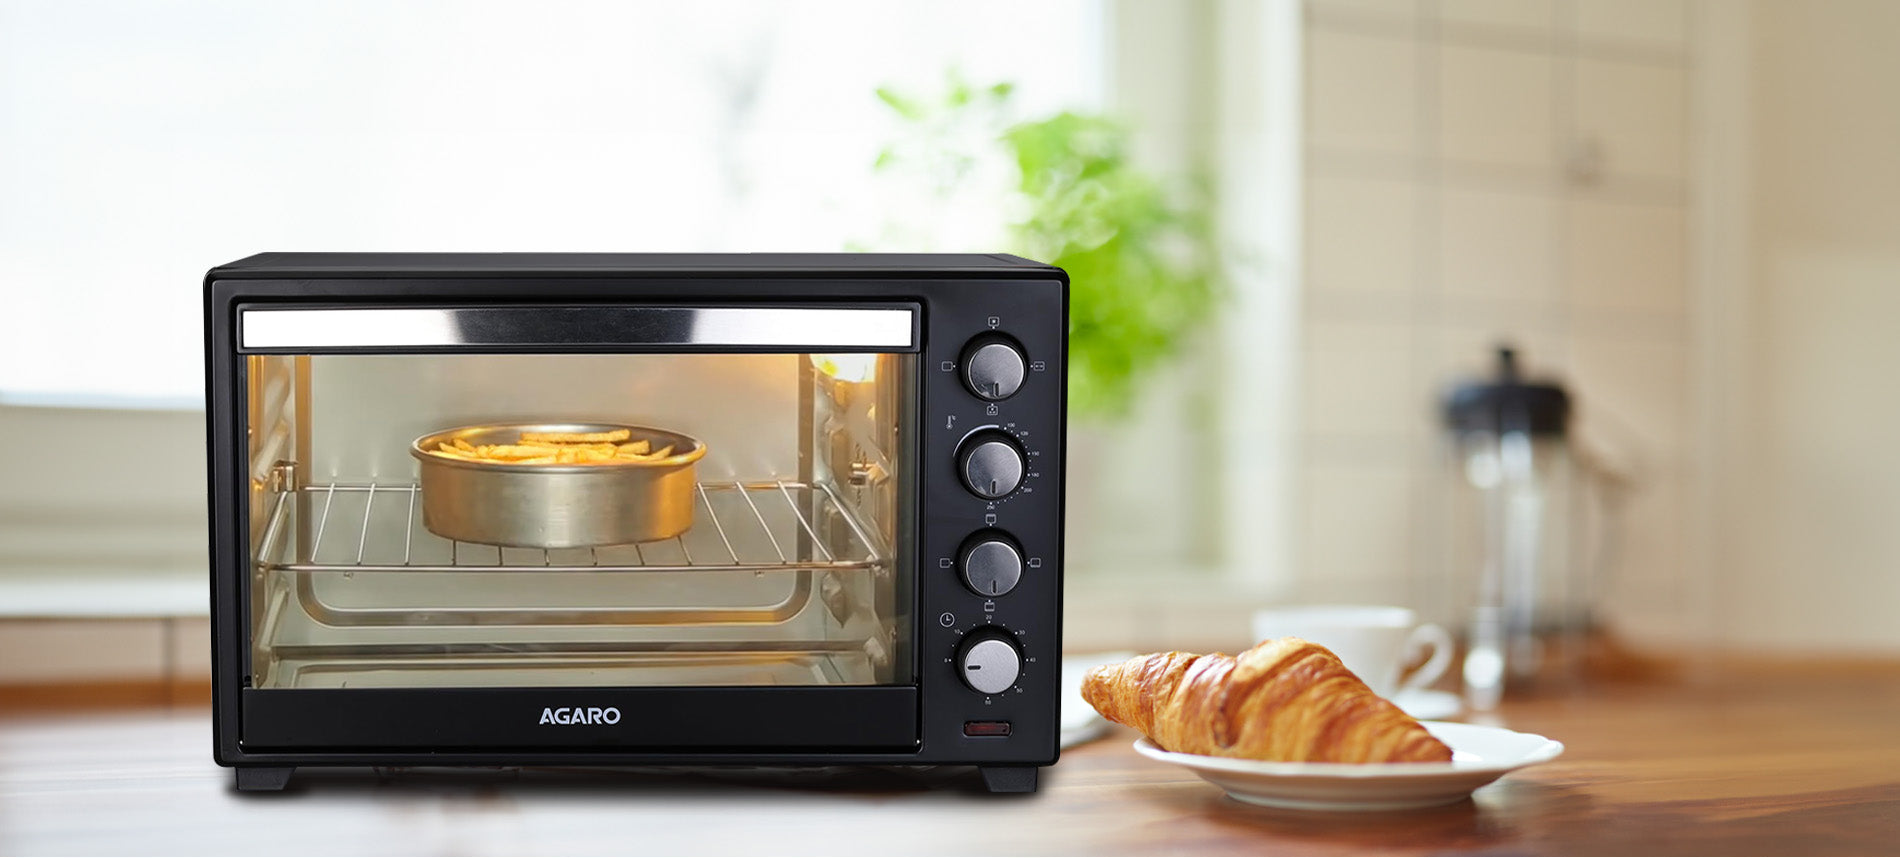 OTG Oven Accessories You Need in Your Kitchen – Agaro